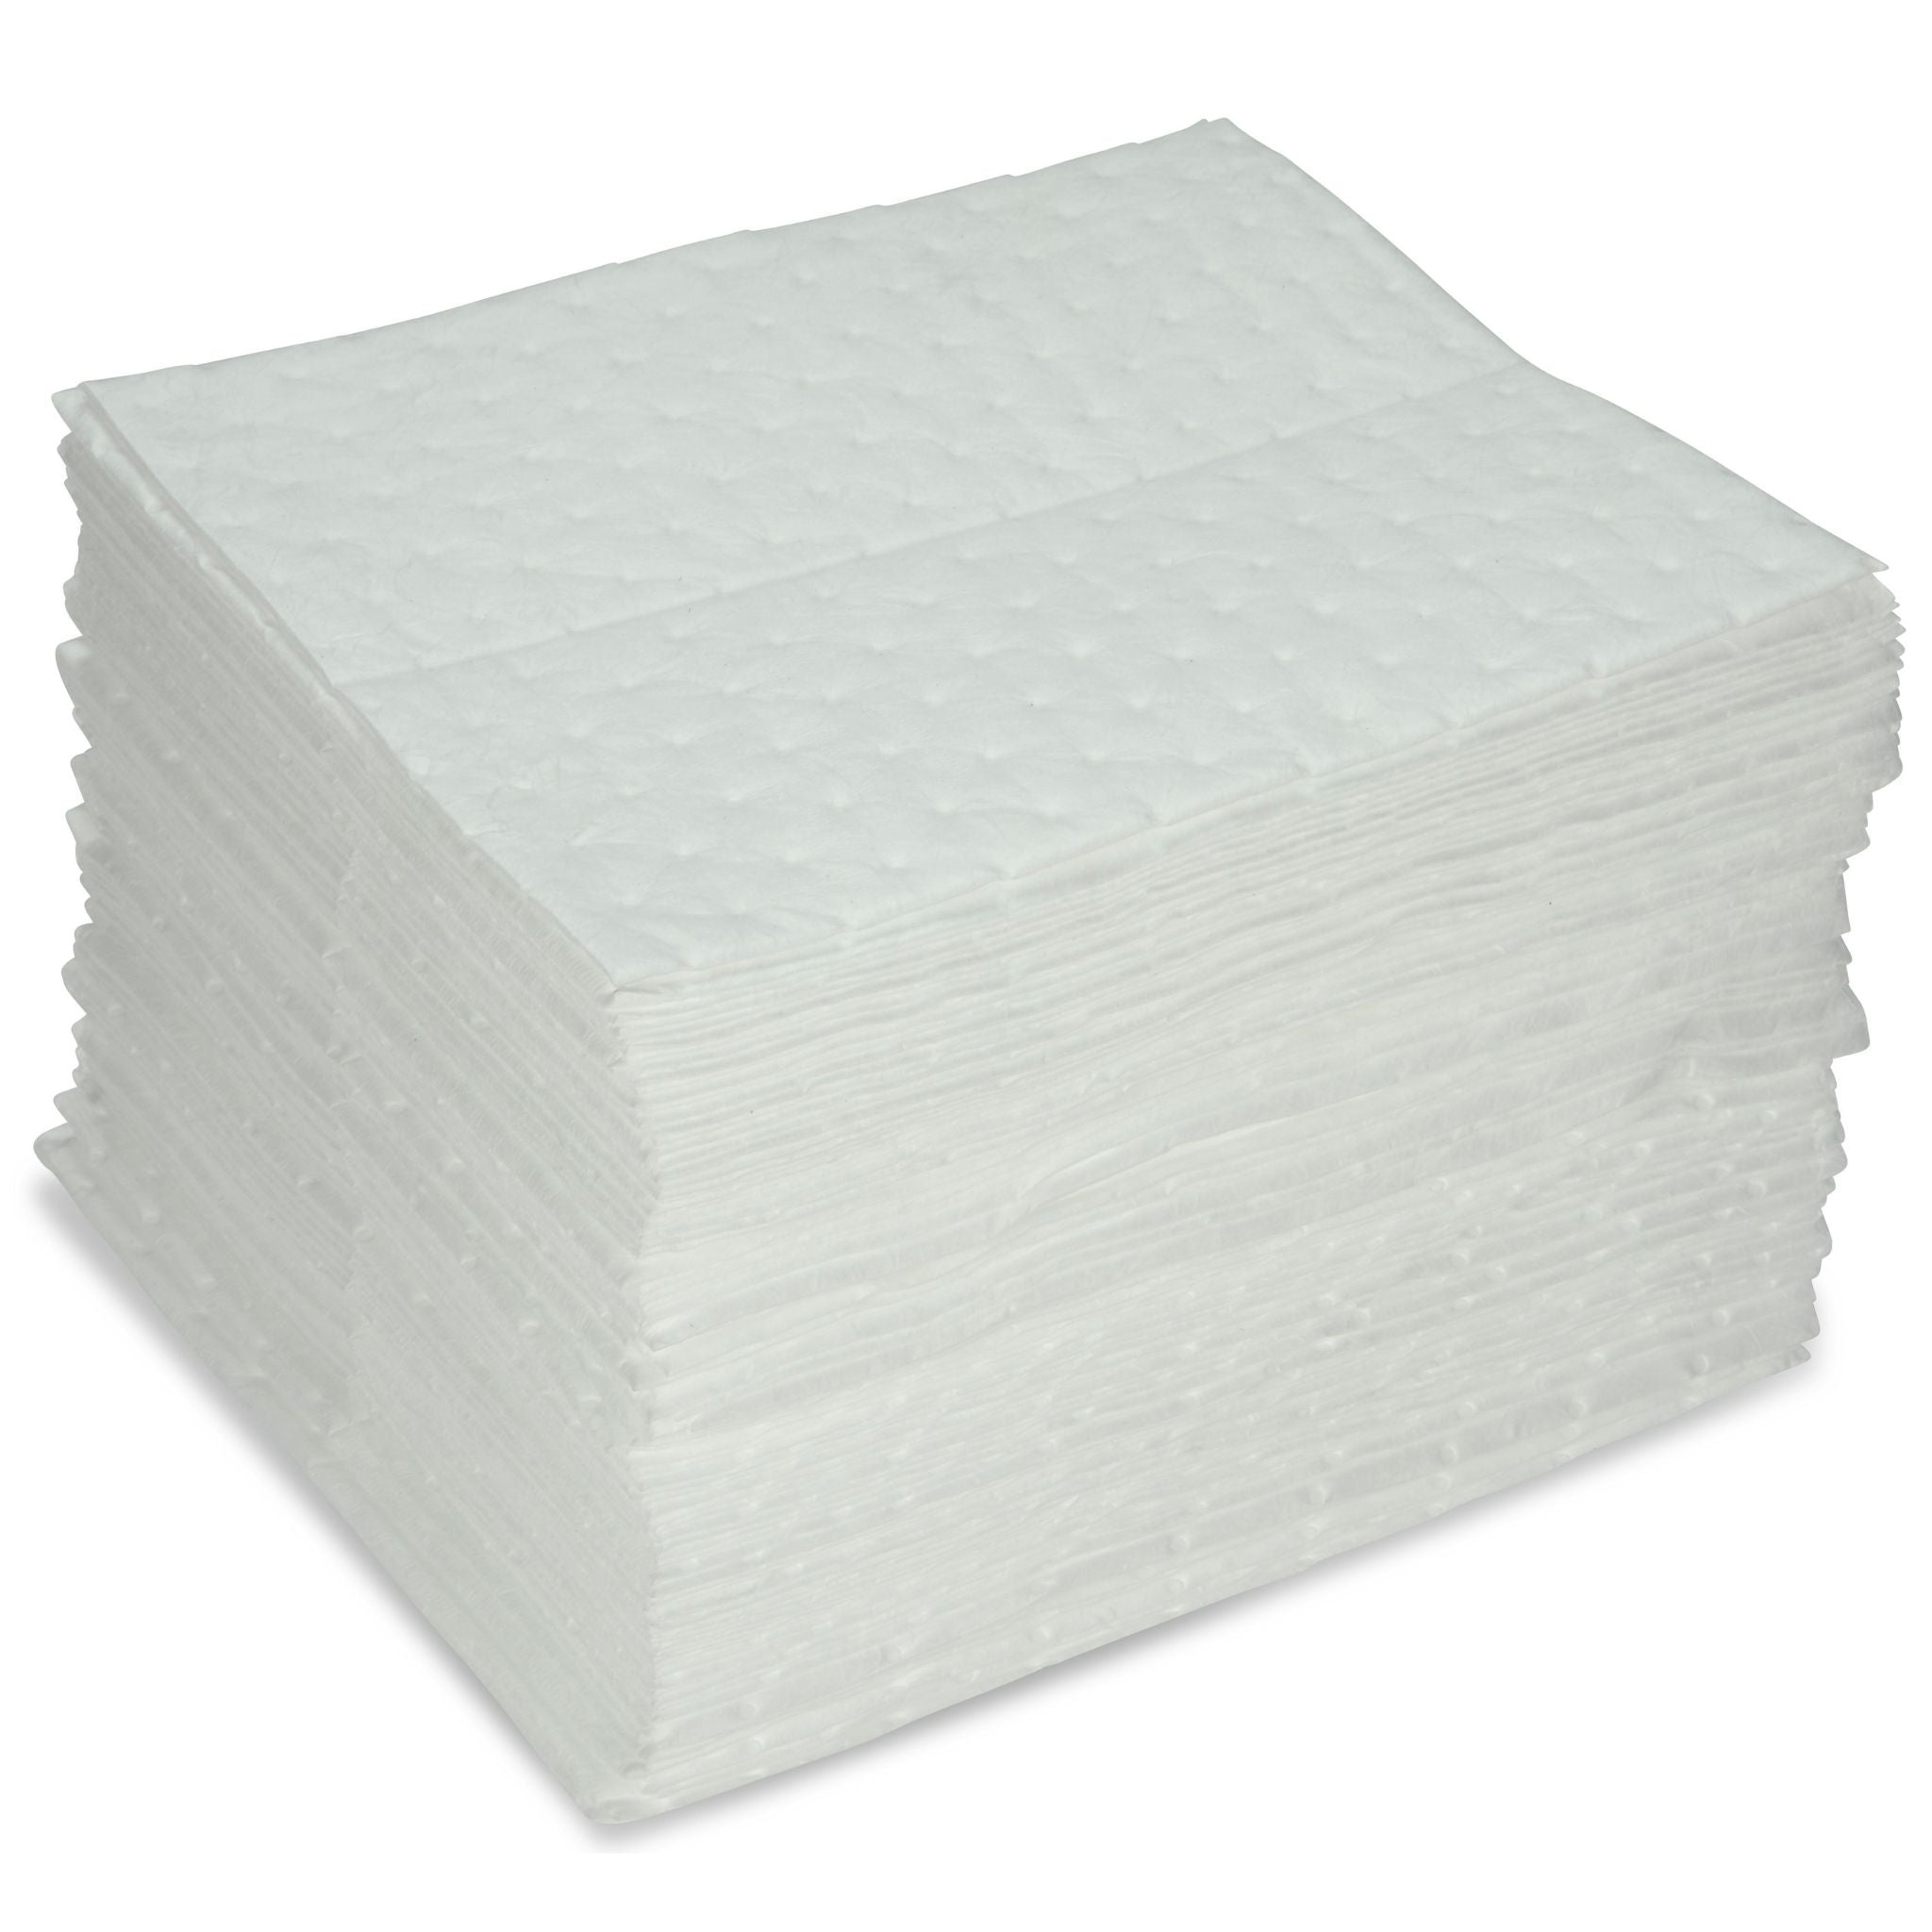 AABACO Oil ONLY White Absorbent Pads - Dimpled HEAVY Weight Pads – 15”x 18” (100/bale)